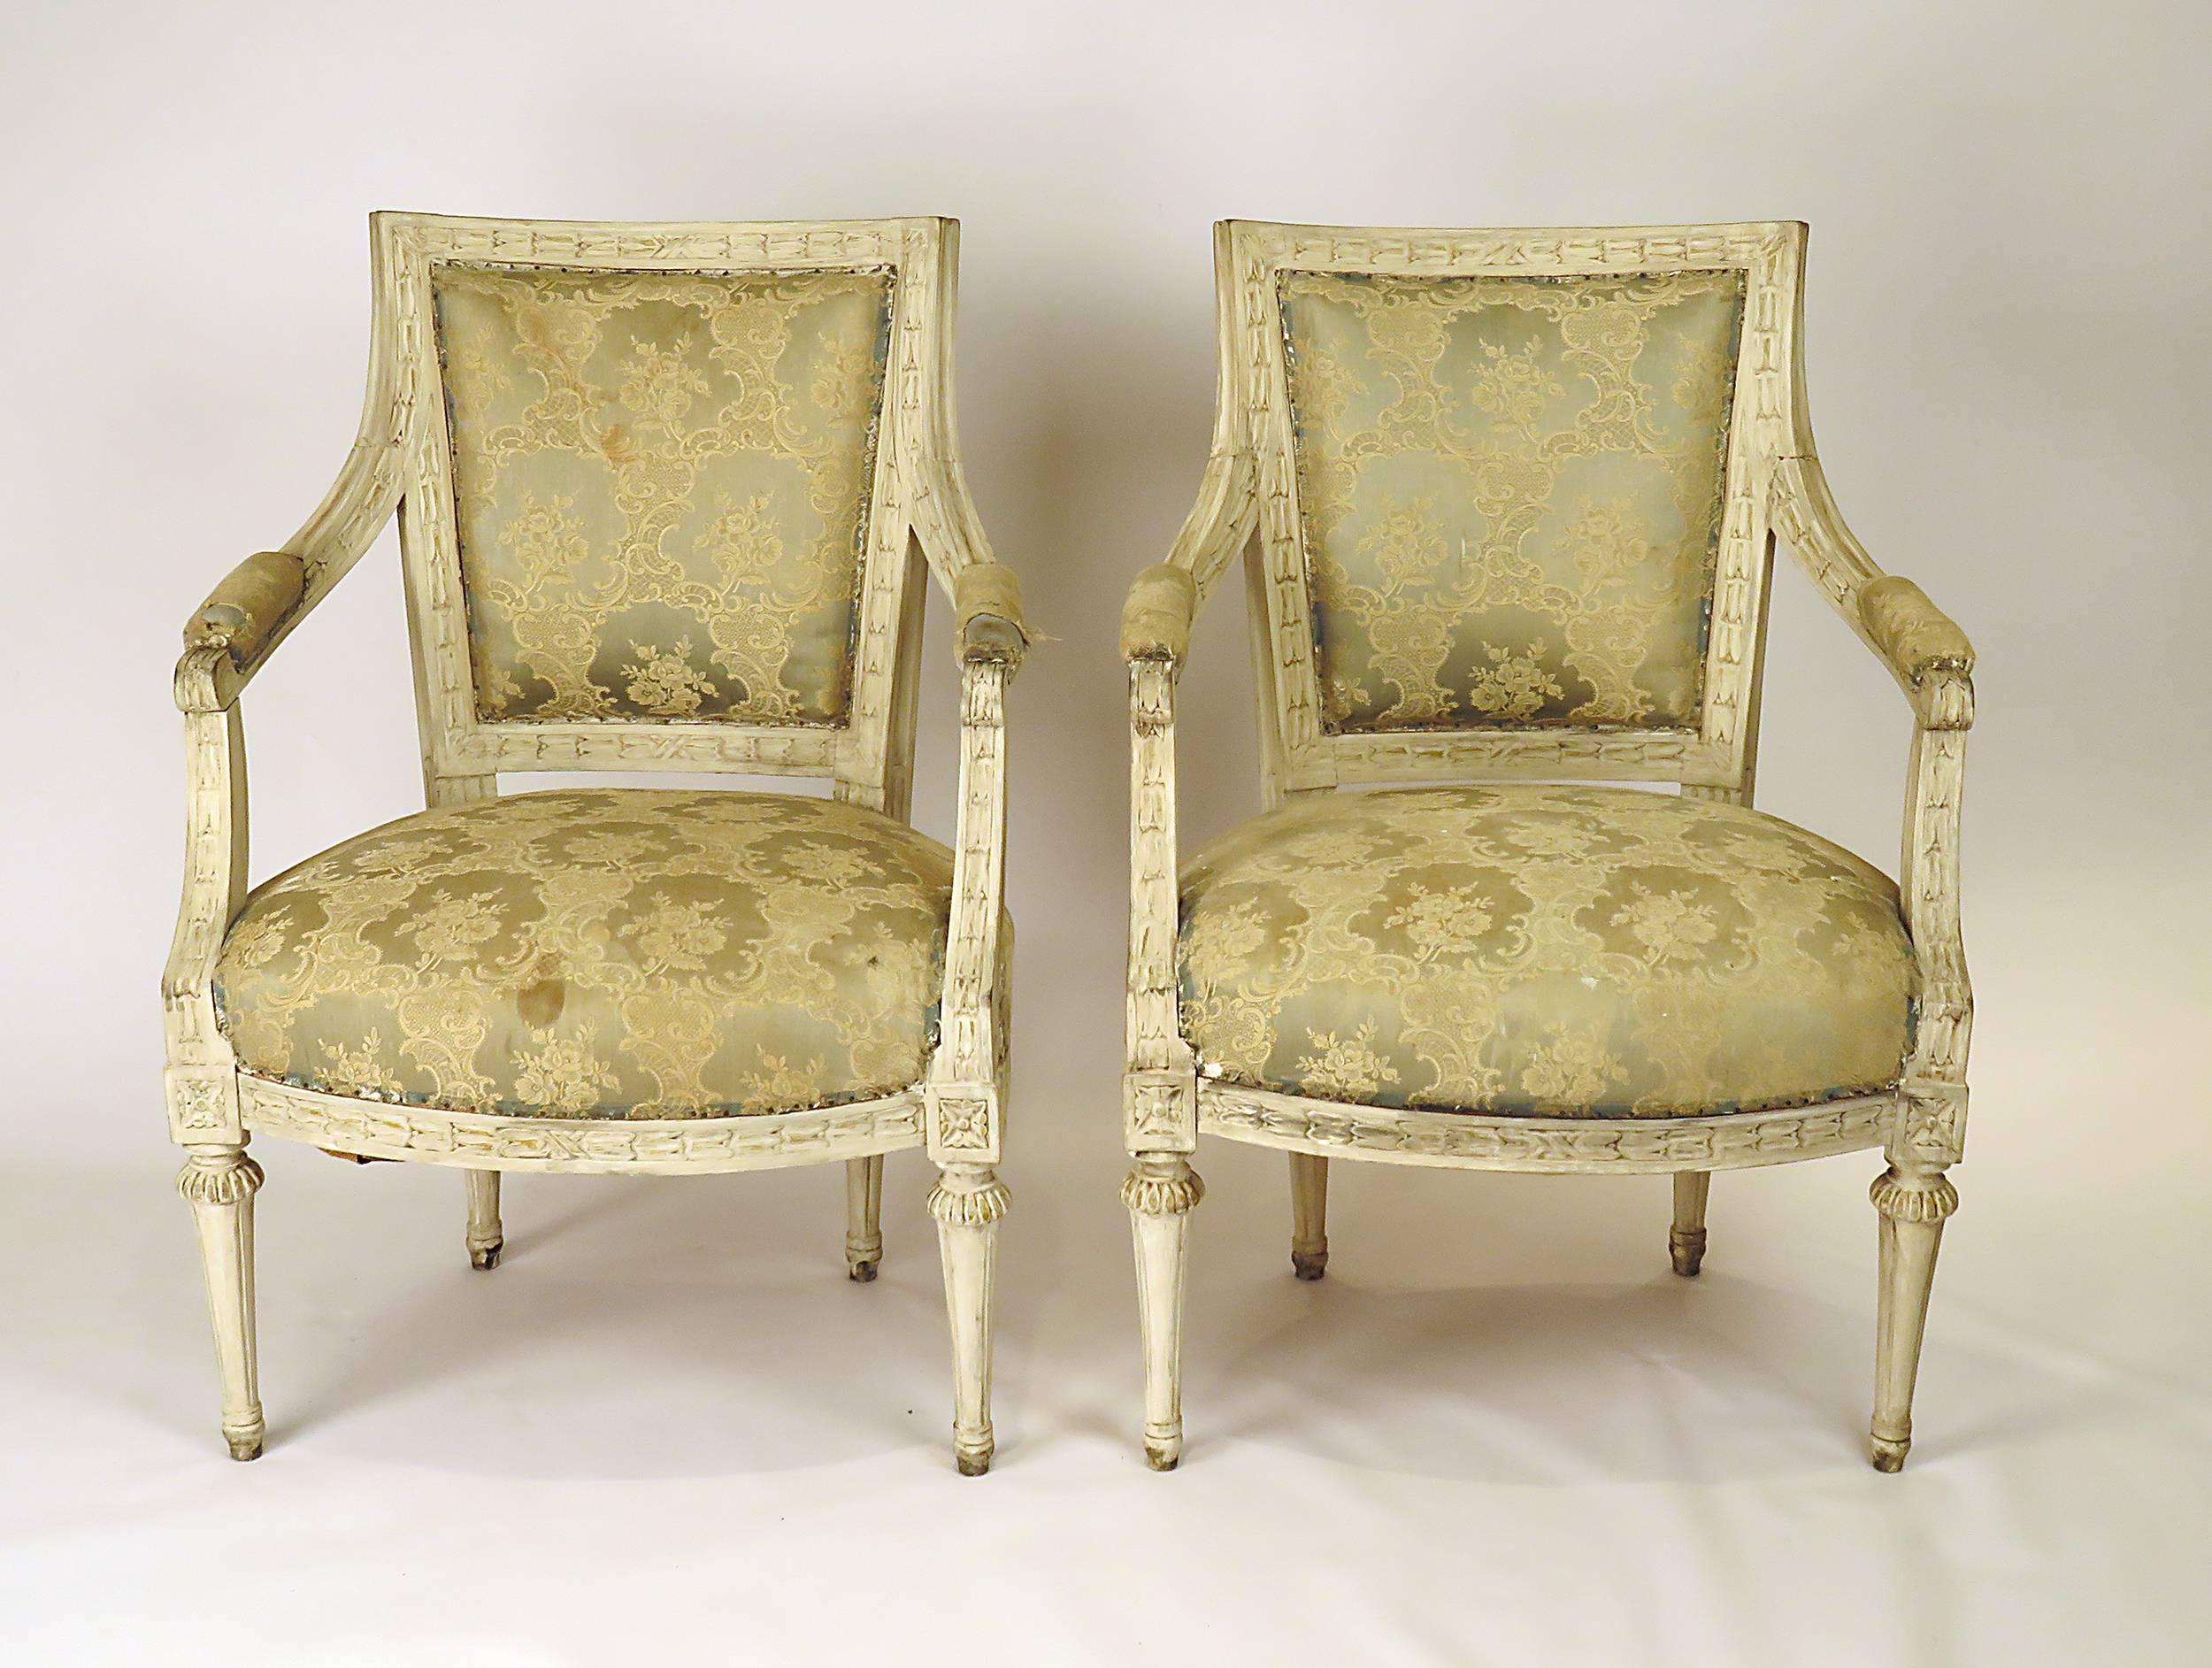 Made in Sweden late in the 19th or early in the 20th century. A very nice pair of Louis XVI style armchair with well carved accents. Recently tightened. The painted surface is later. This design originates about 100 years earlier in the Gustavian